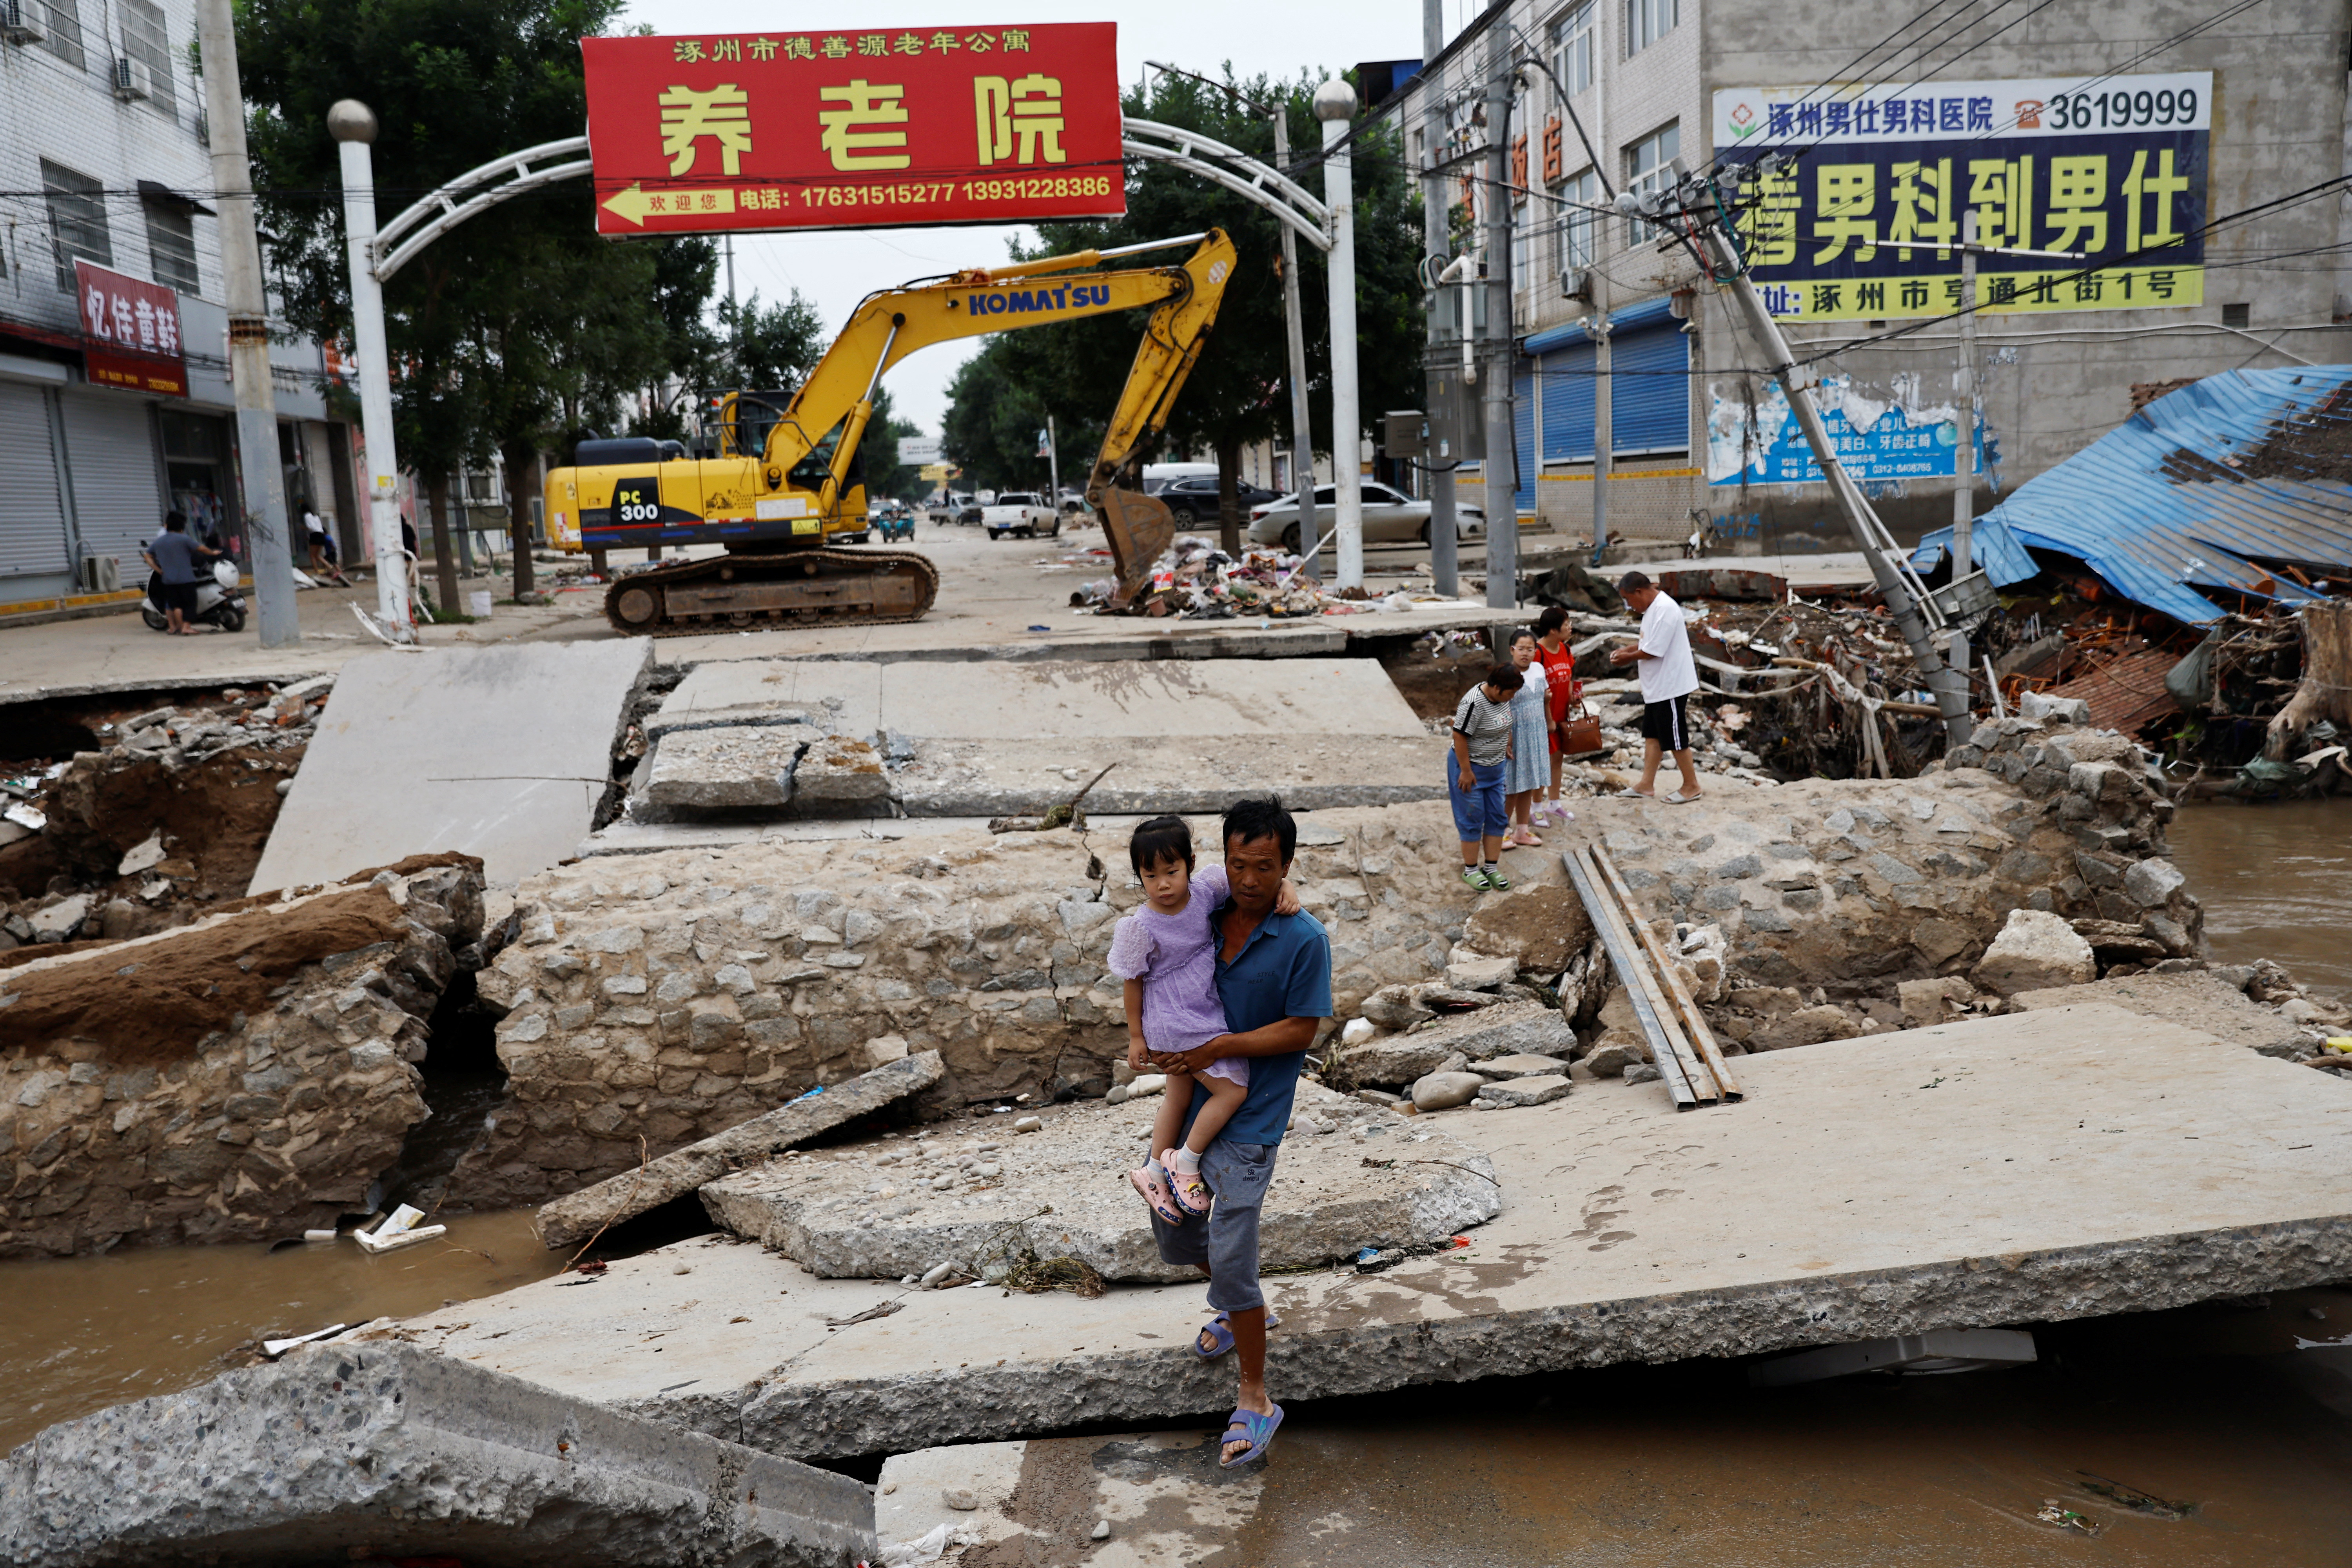 Aftermath of flooding in Zhuozhou, Hebei province